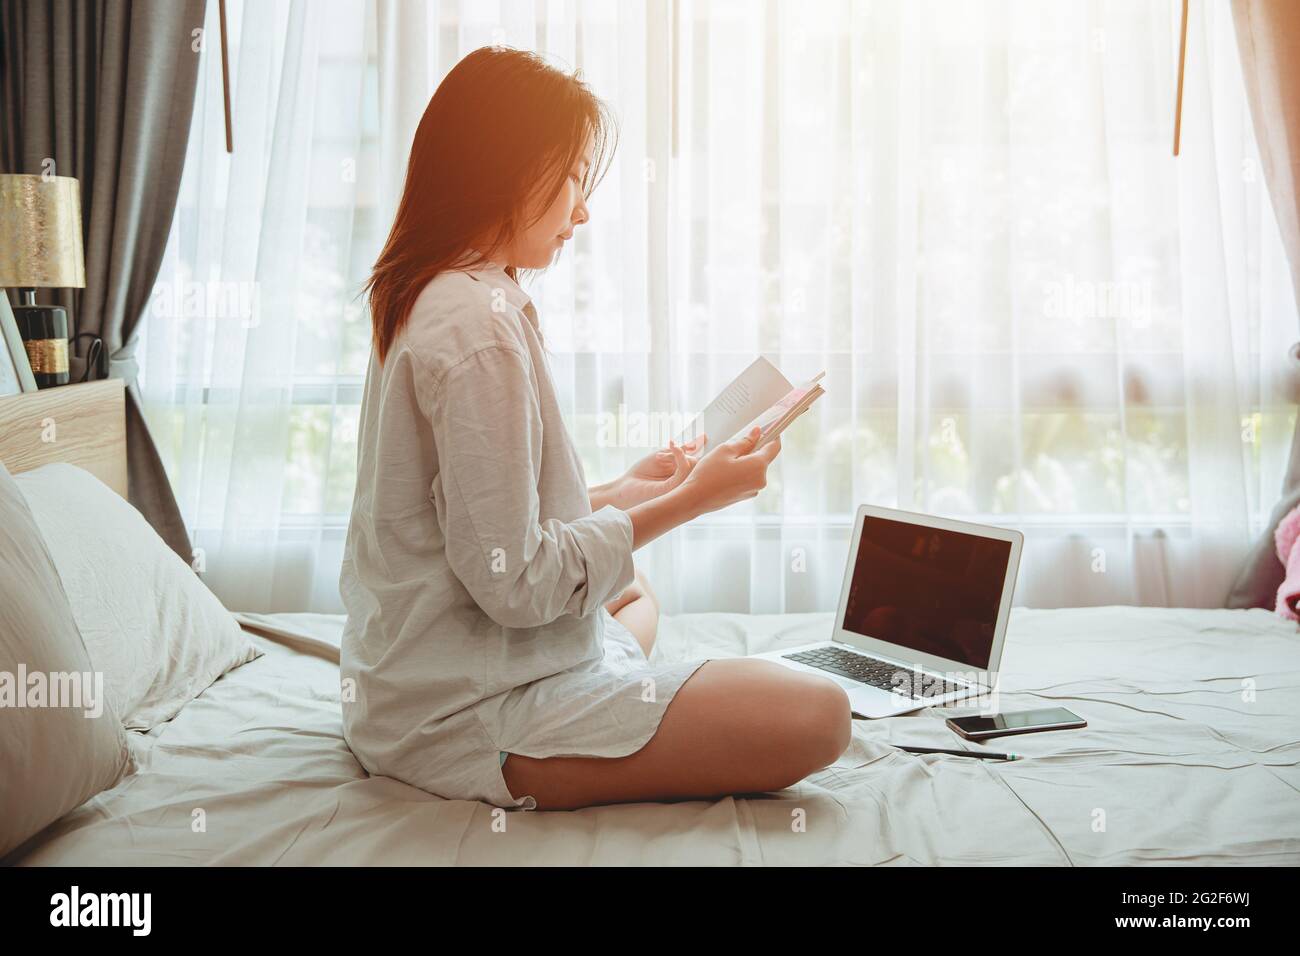 Girl teen read a book self education or working at home during covid self quarantine. women reading a book at bed in the morning. Stock Photo